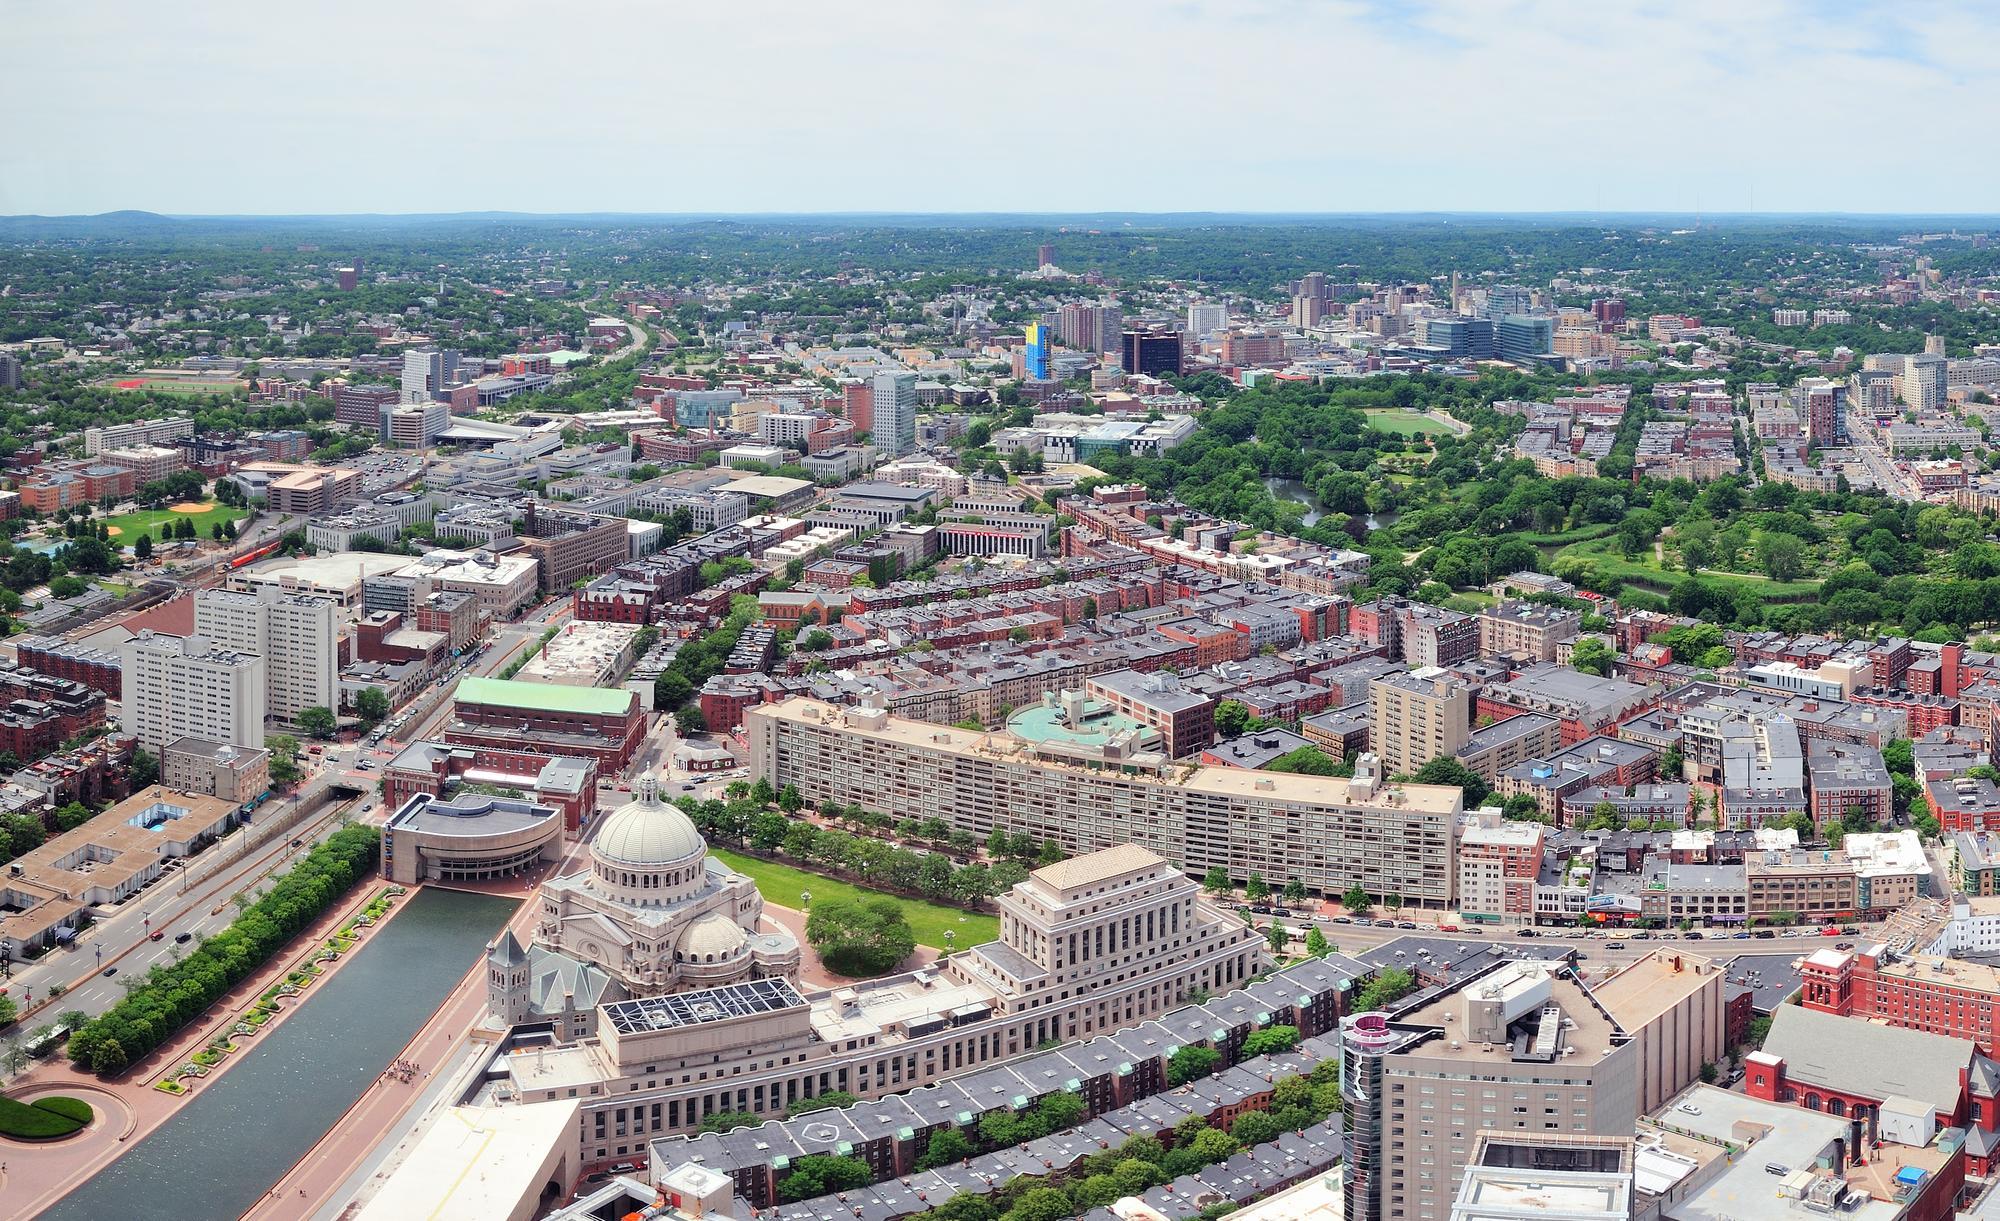 boston-city-aerial-panorama-view-with-urban-buildings-highway